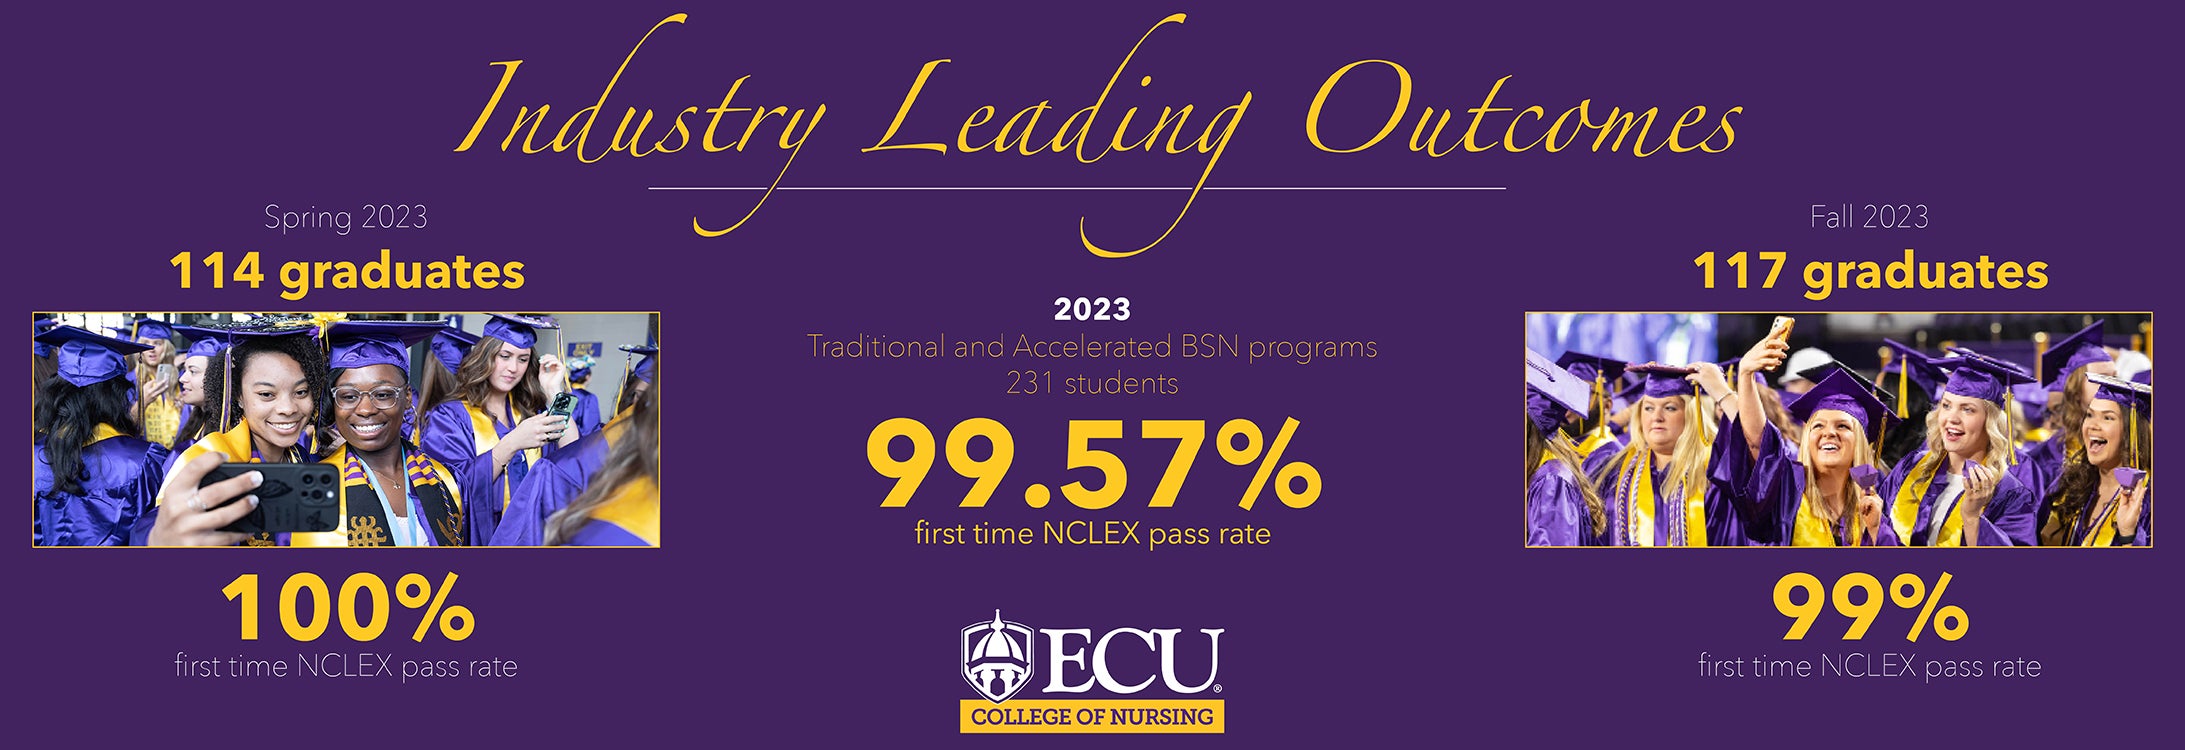 An image describing the 2023 ECU College of Nursing NCLEX first time pass rates, including the Spring and Fall classes. The yearly average is shown at 99.57% and two images of graduating nursing students are accompanied by text that indicate a 100% first time pass rate for the Spring 2023 class and a 99% first time pass rate for the Fall 2024 class.